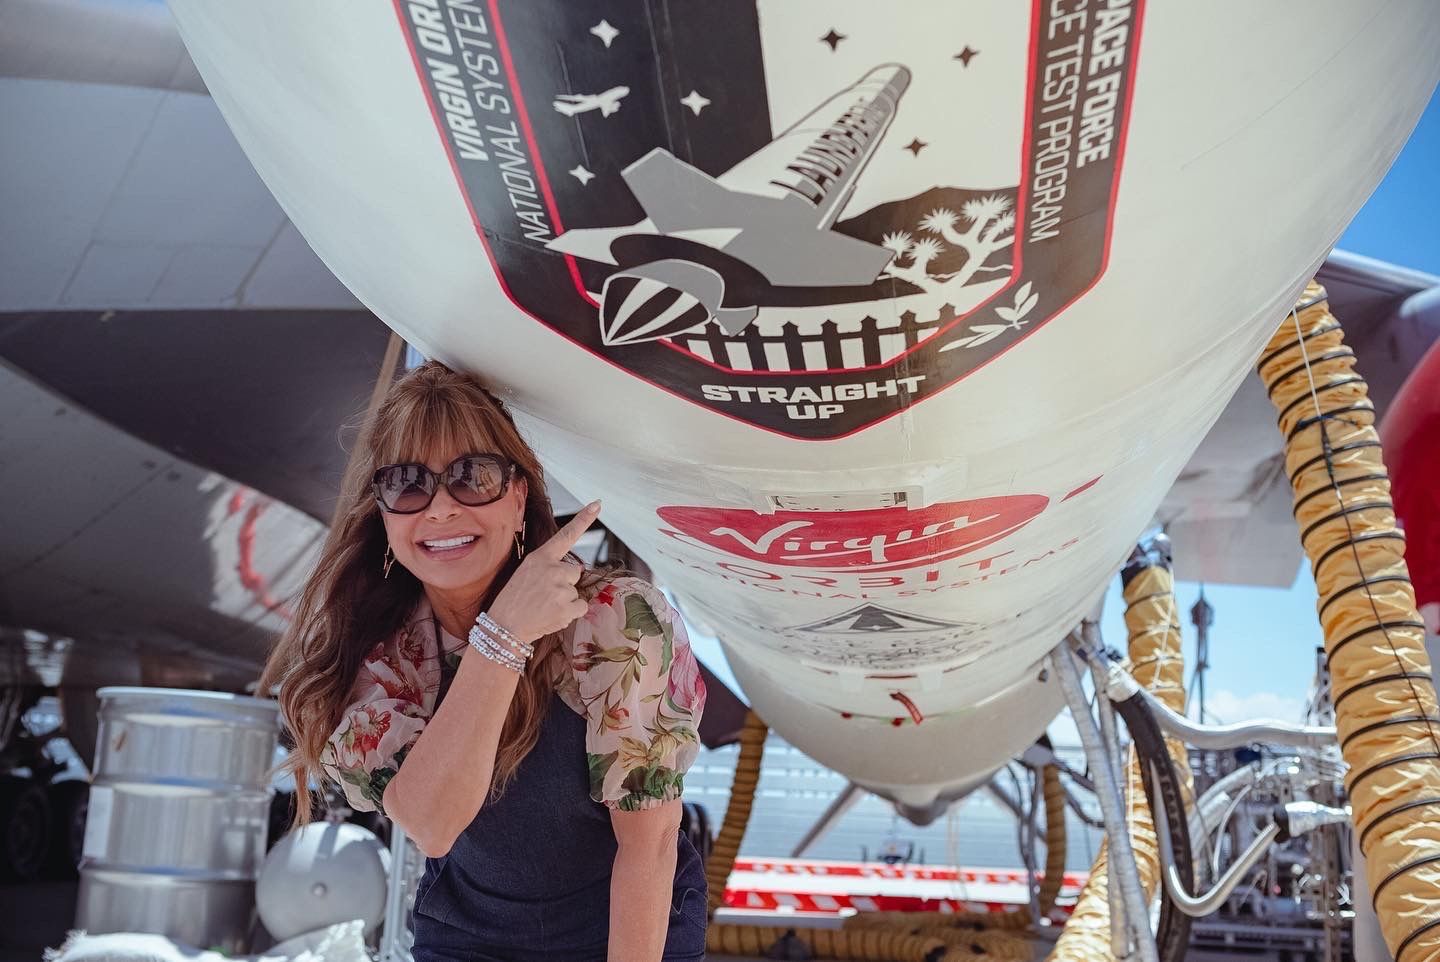 American singer Paula Abdul with the Boeing 747 Cosmic Girl before the Straight Up mission at the Mojave Air and Space Port.